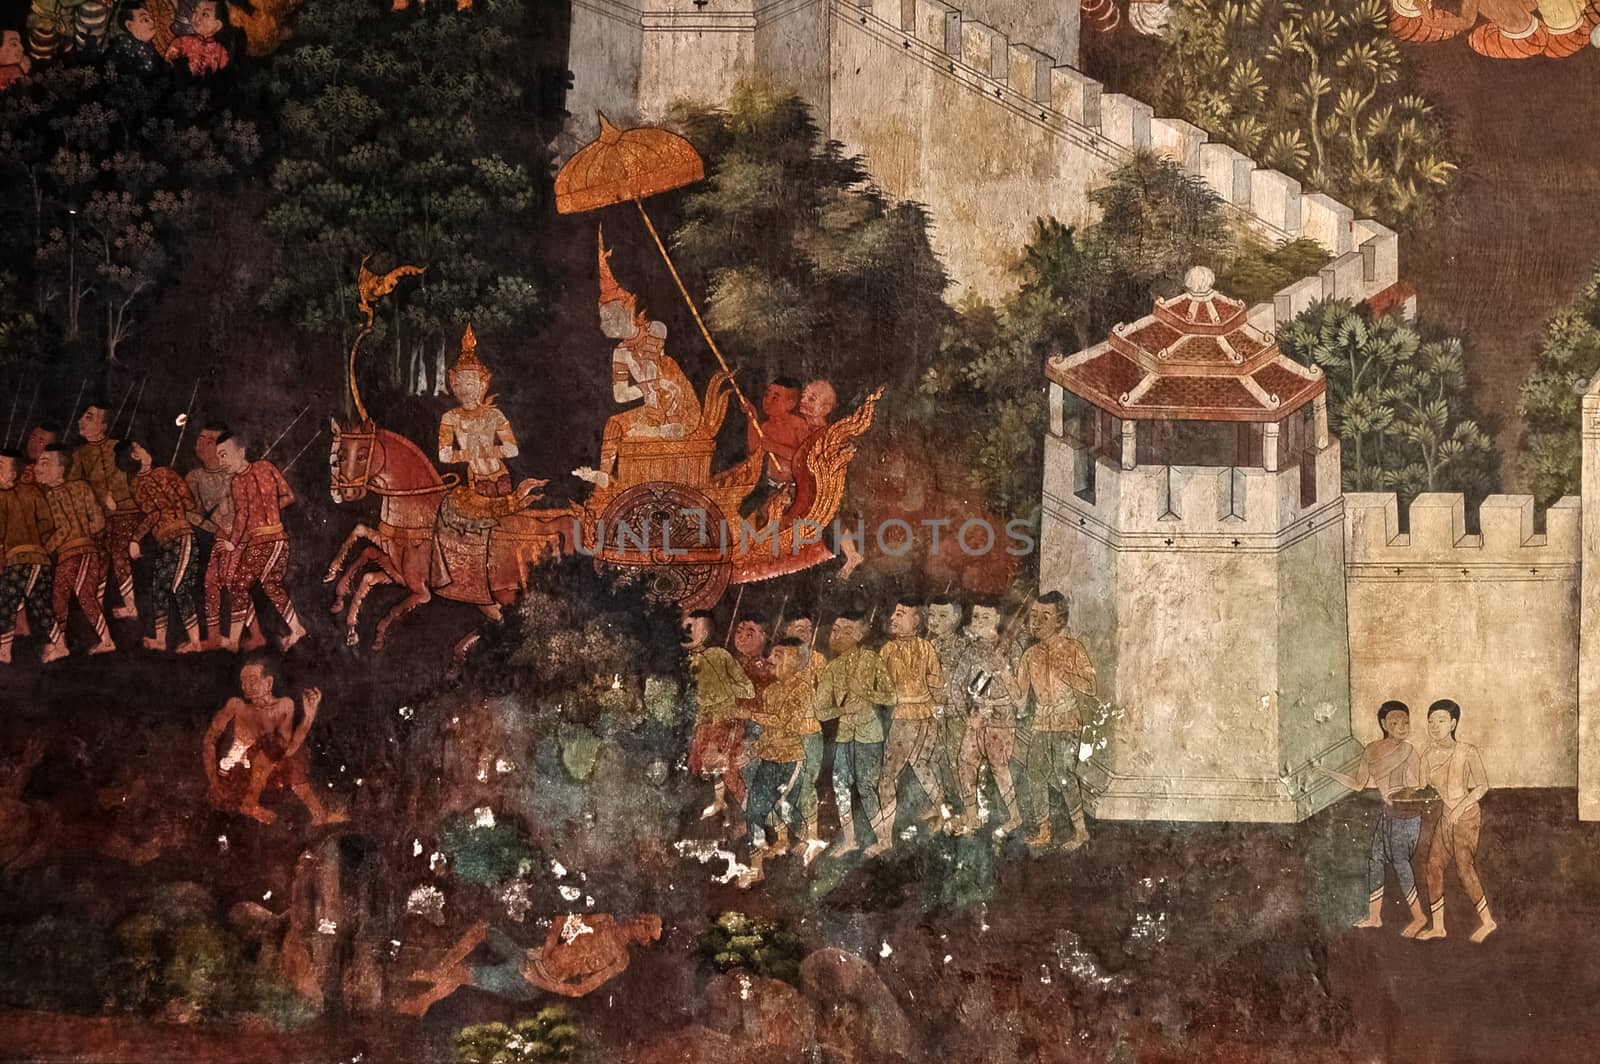 Ancient Thai Ramayana drawing on a wall (paiting is public domain)